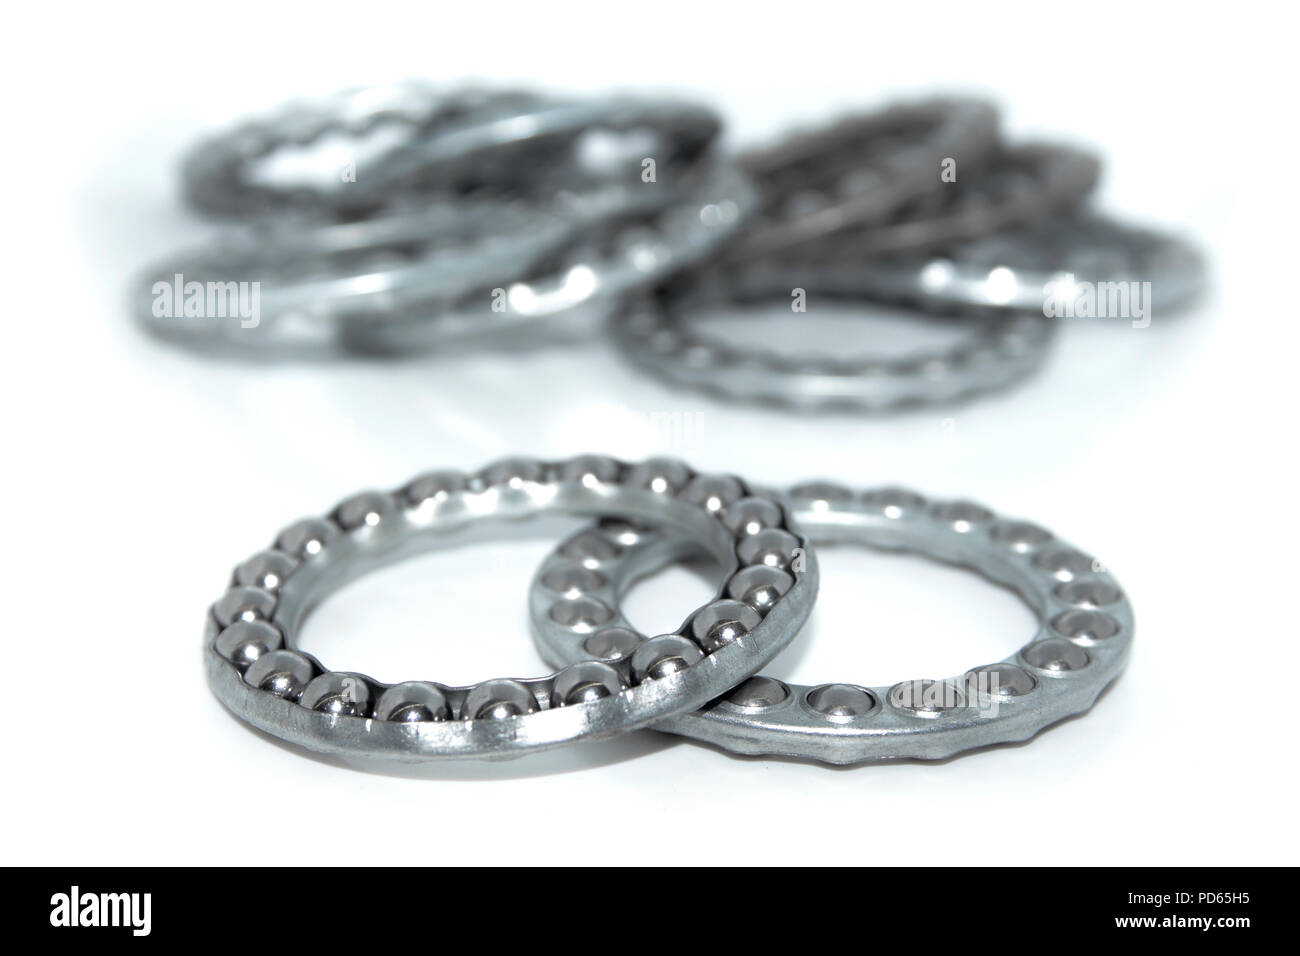 Bearing ball cages for rolls or wheels on white background Stock Photo